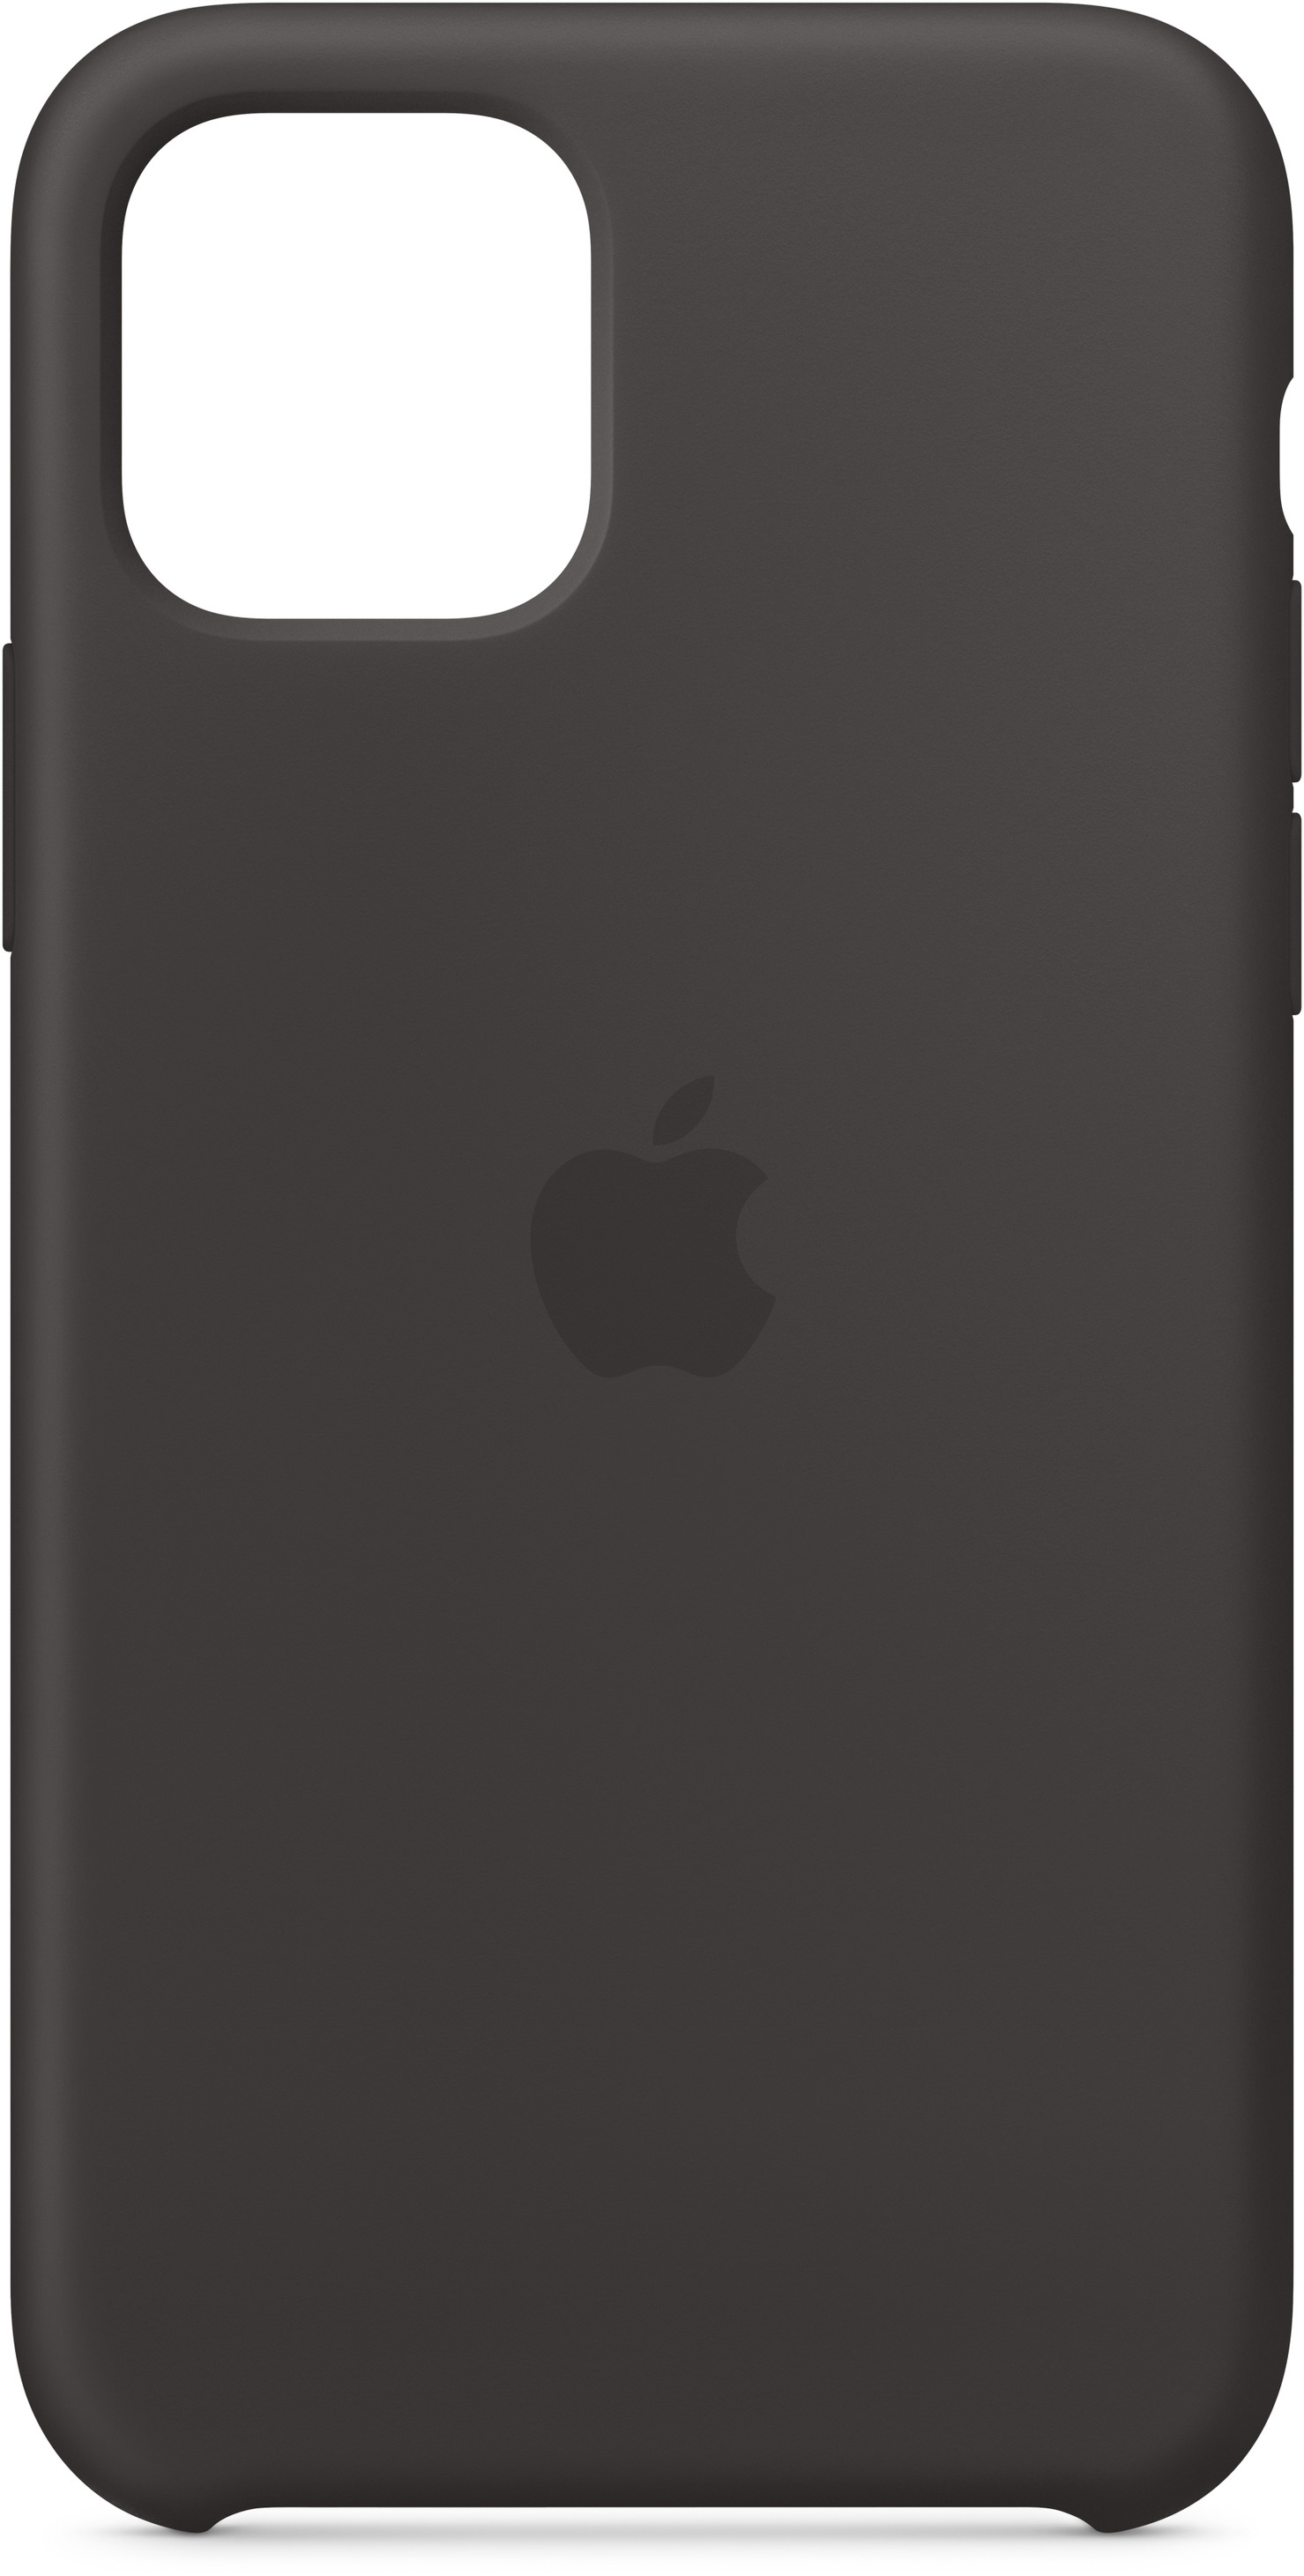 iPhone Case, Pro, 11 Schwarz Backcover, Apple, APPLE Silicone